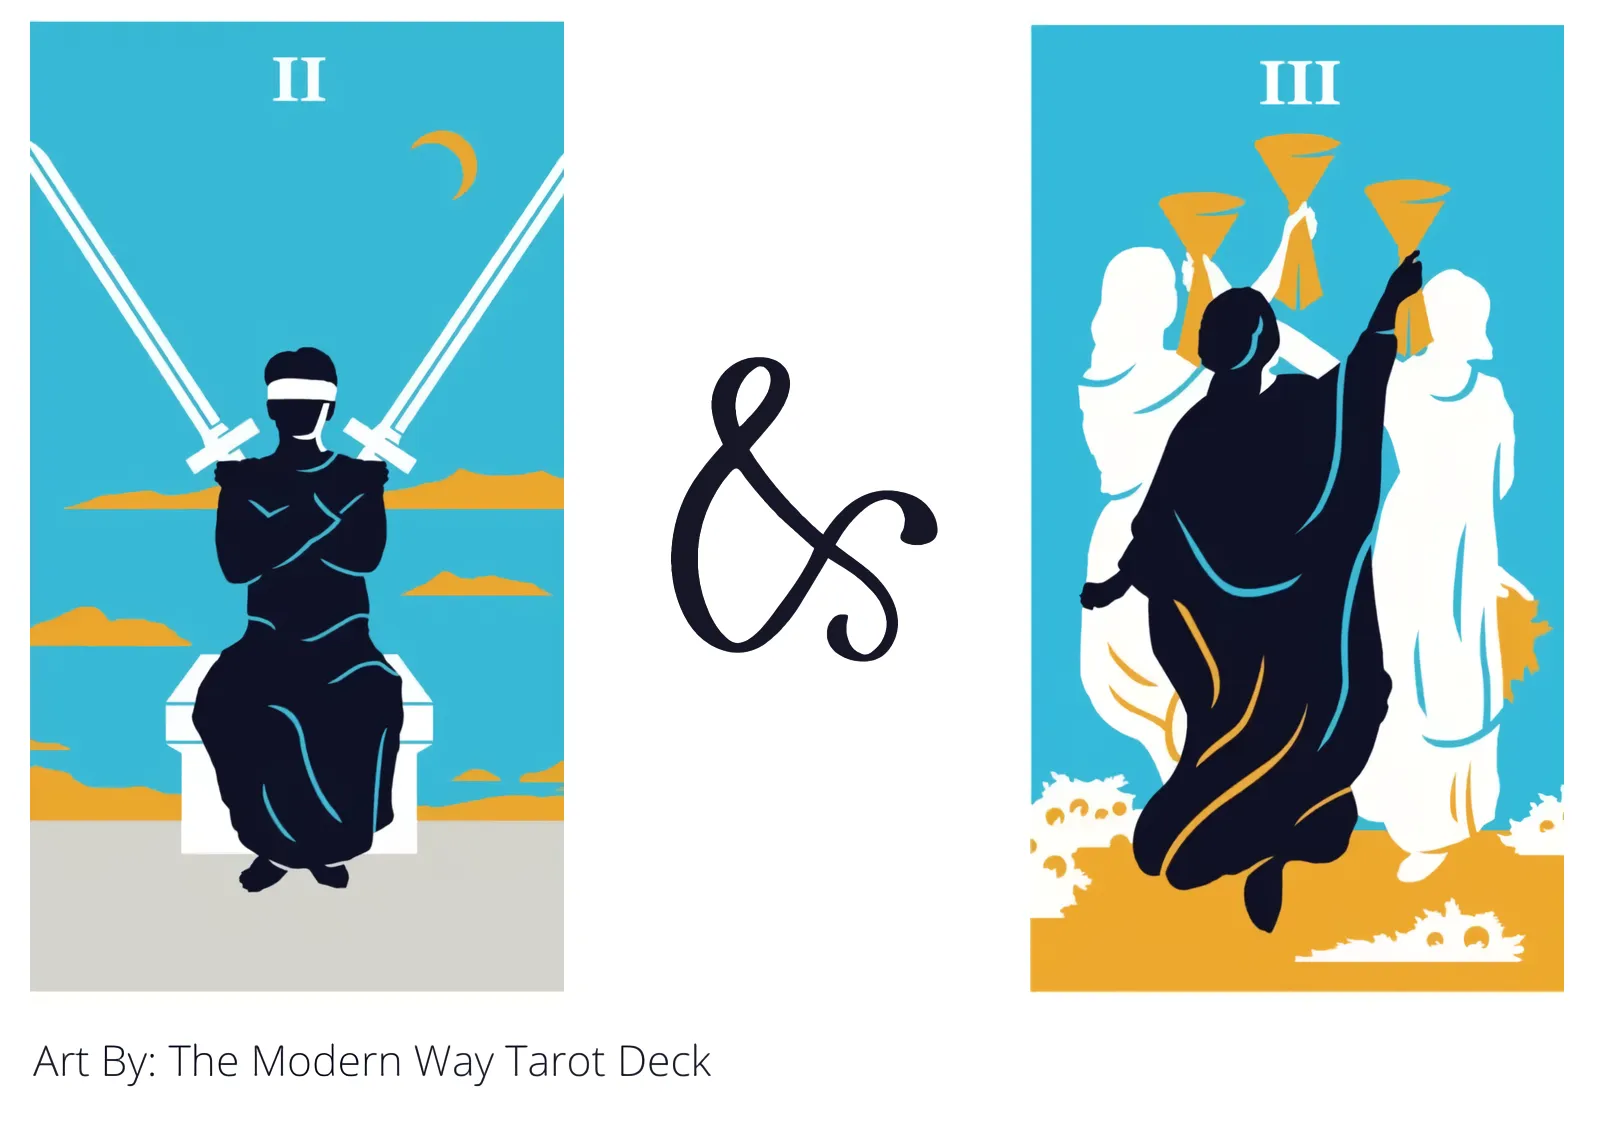 two of swords and three of cups tarot cards together